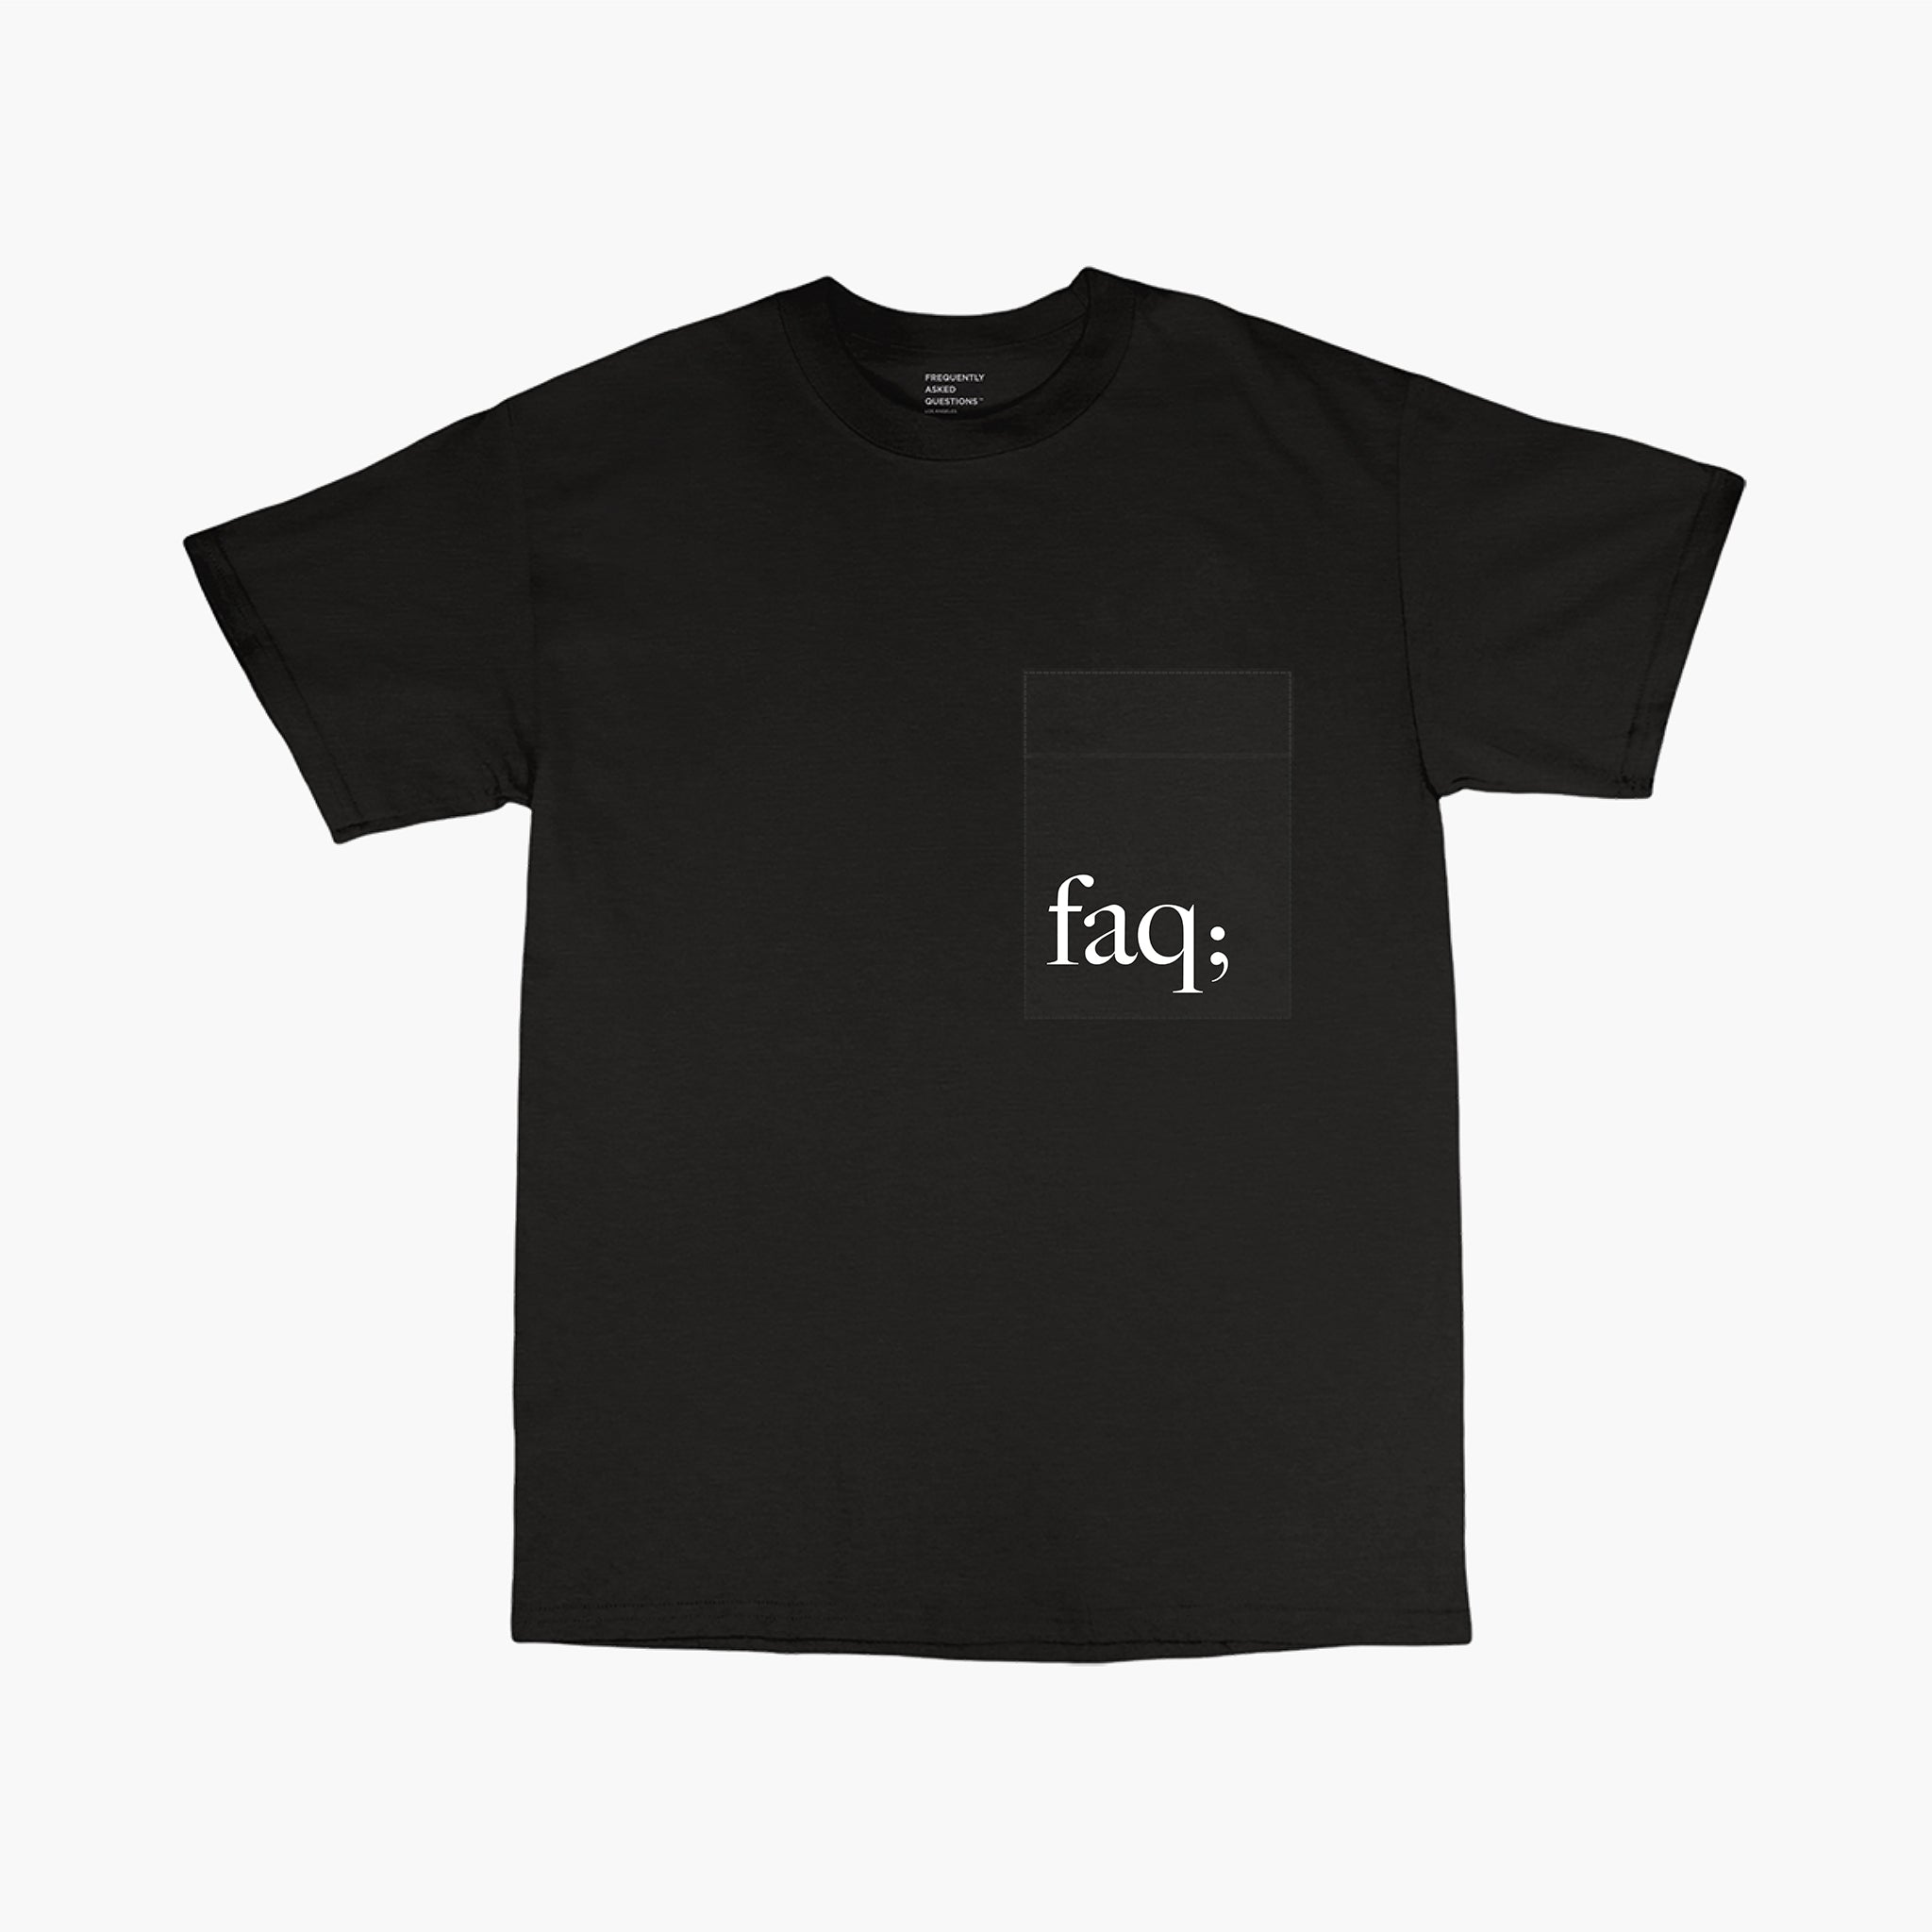 FAQ Pocket T-Shirt - Frequently Asked Questions